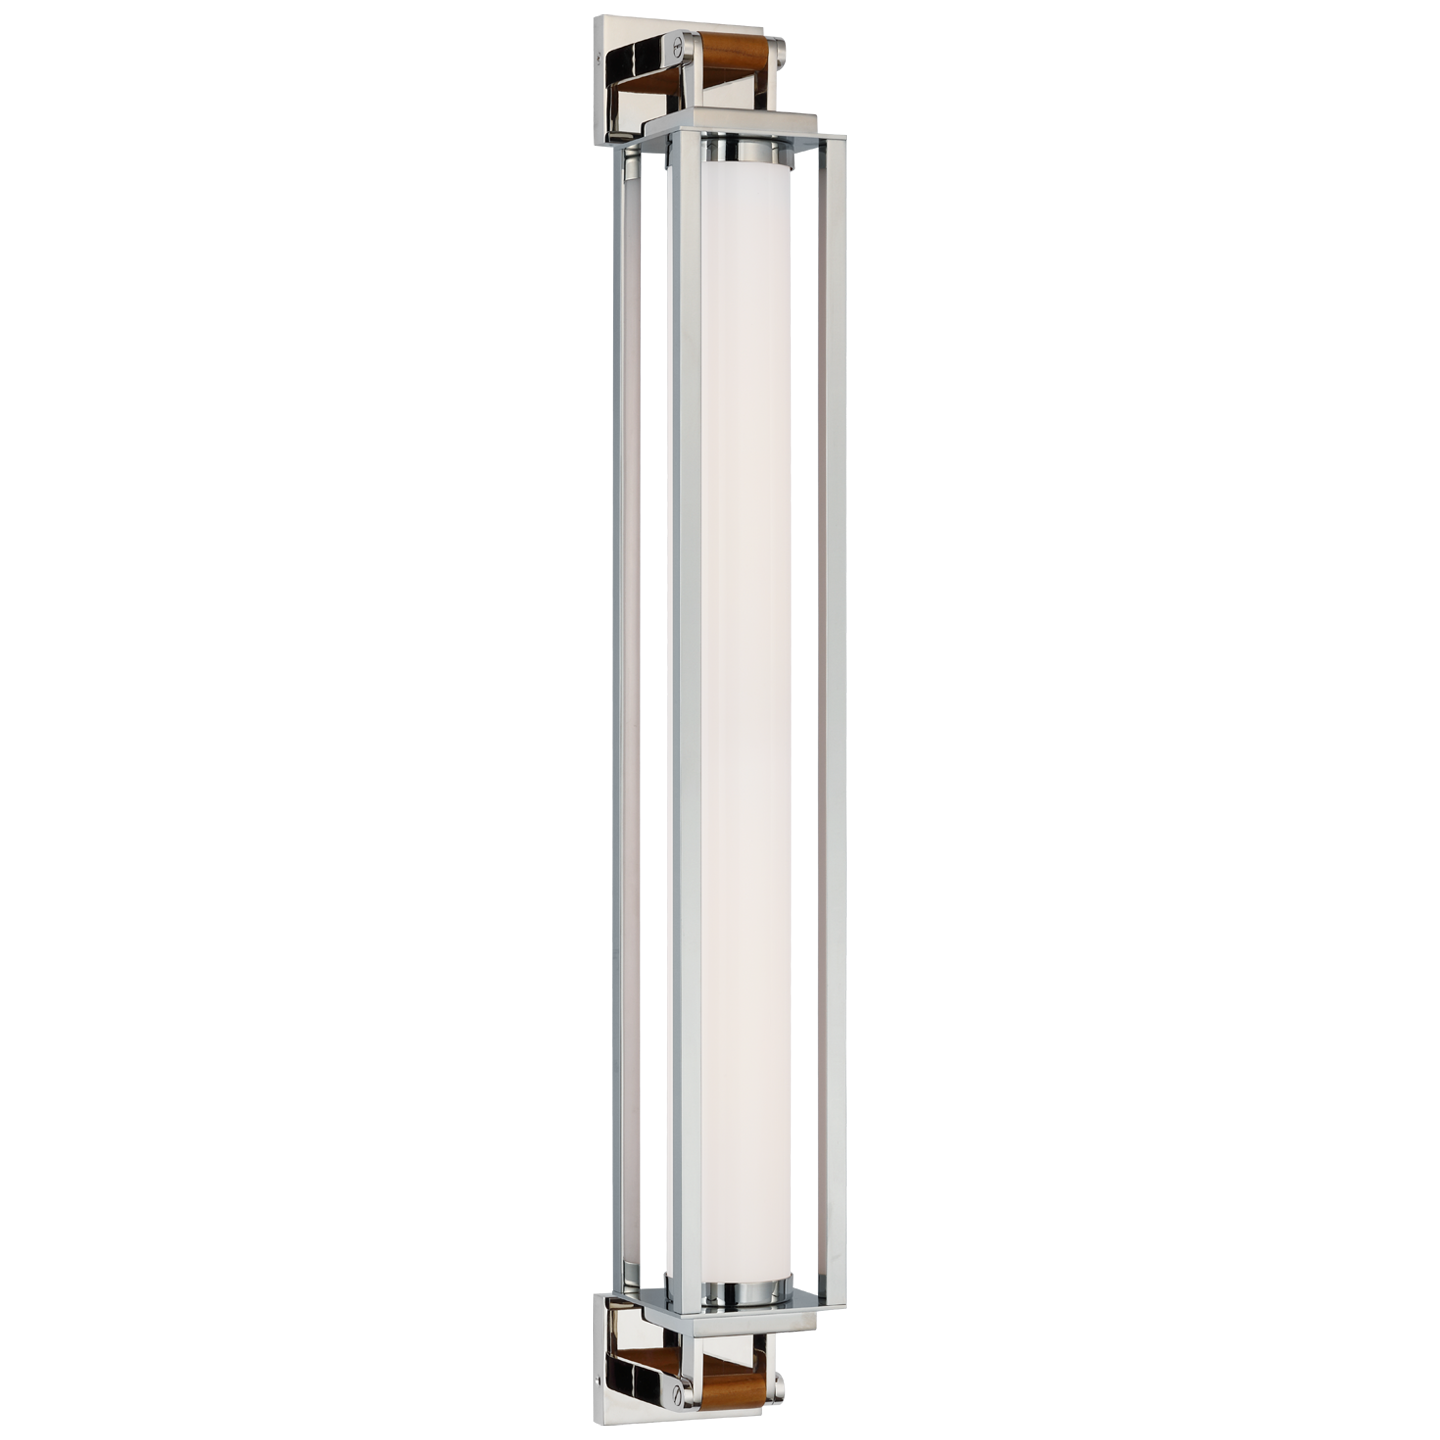 Northport Wall Lamp 82 cm - Polished Nickel and White Glass